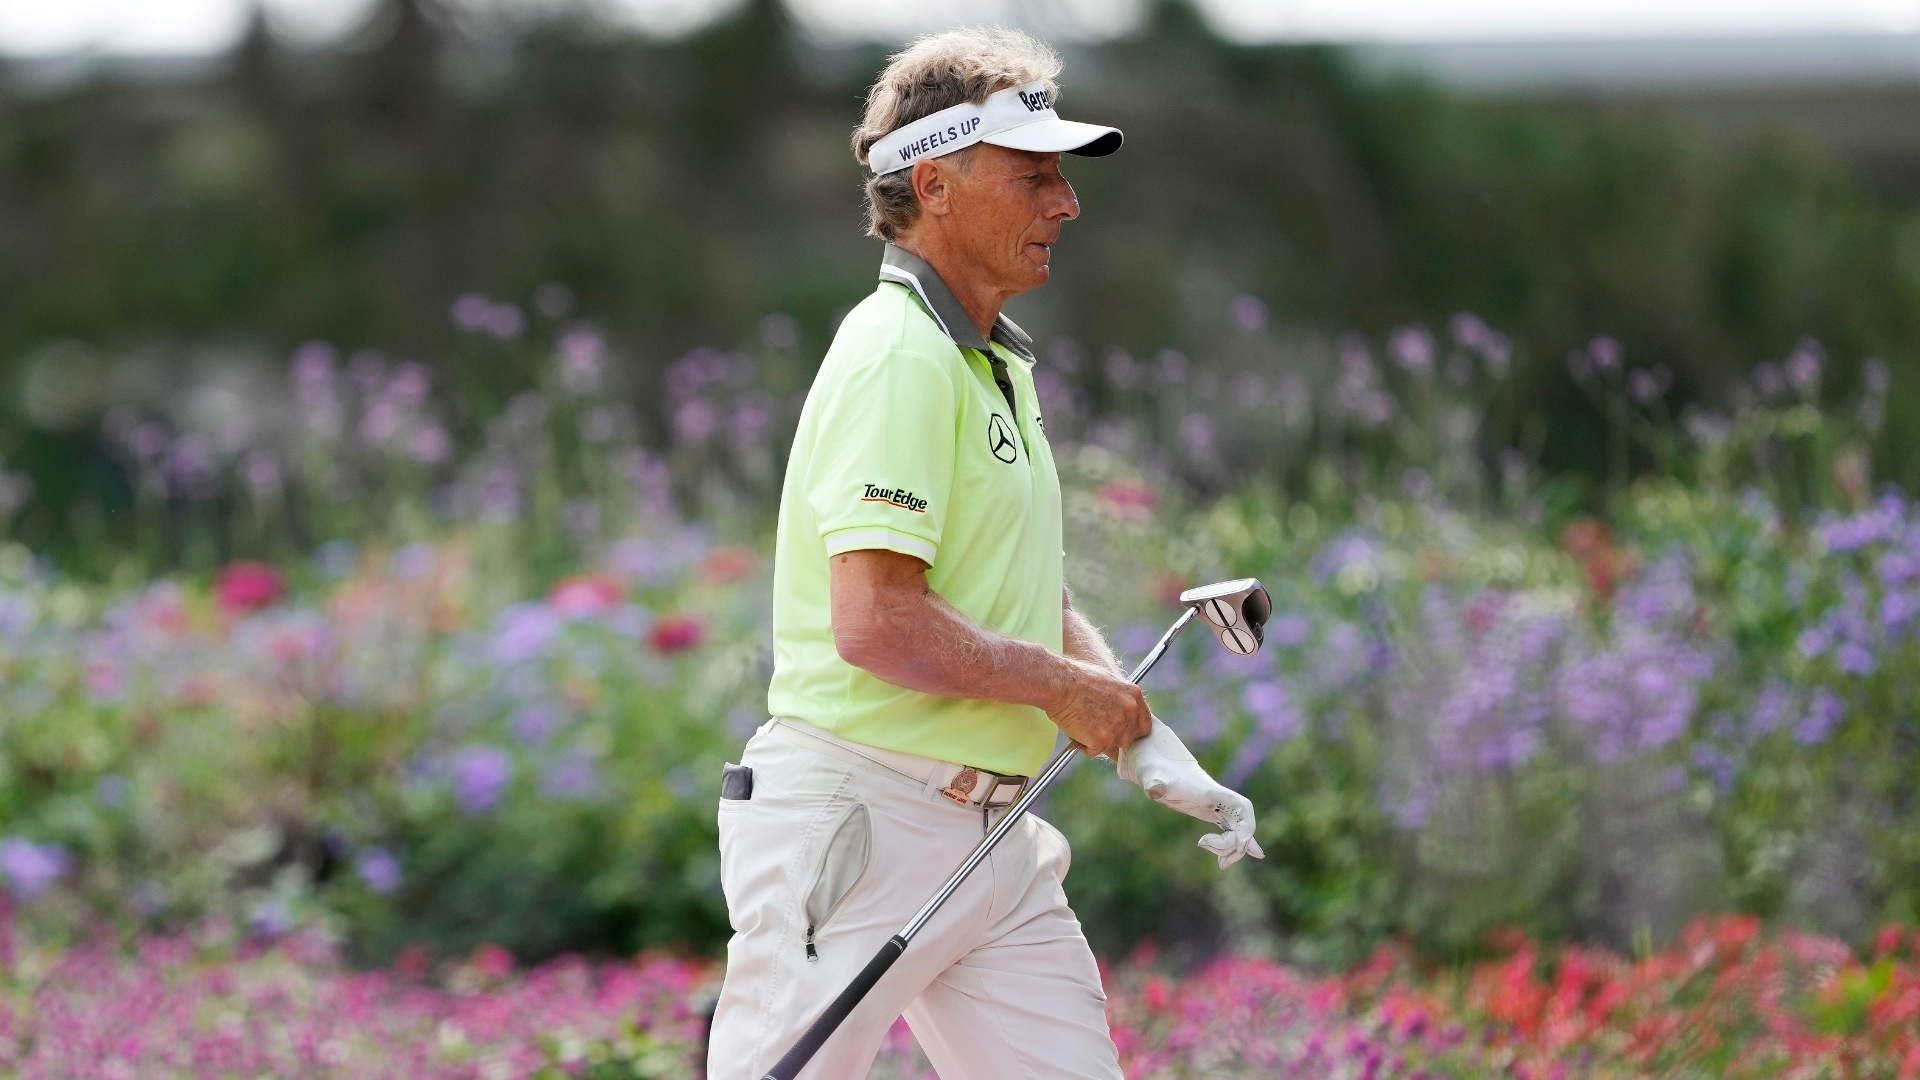 65-year-old Bernhard Langer takes 2-shot lead in the US Senior Open at SentryWorld